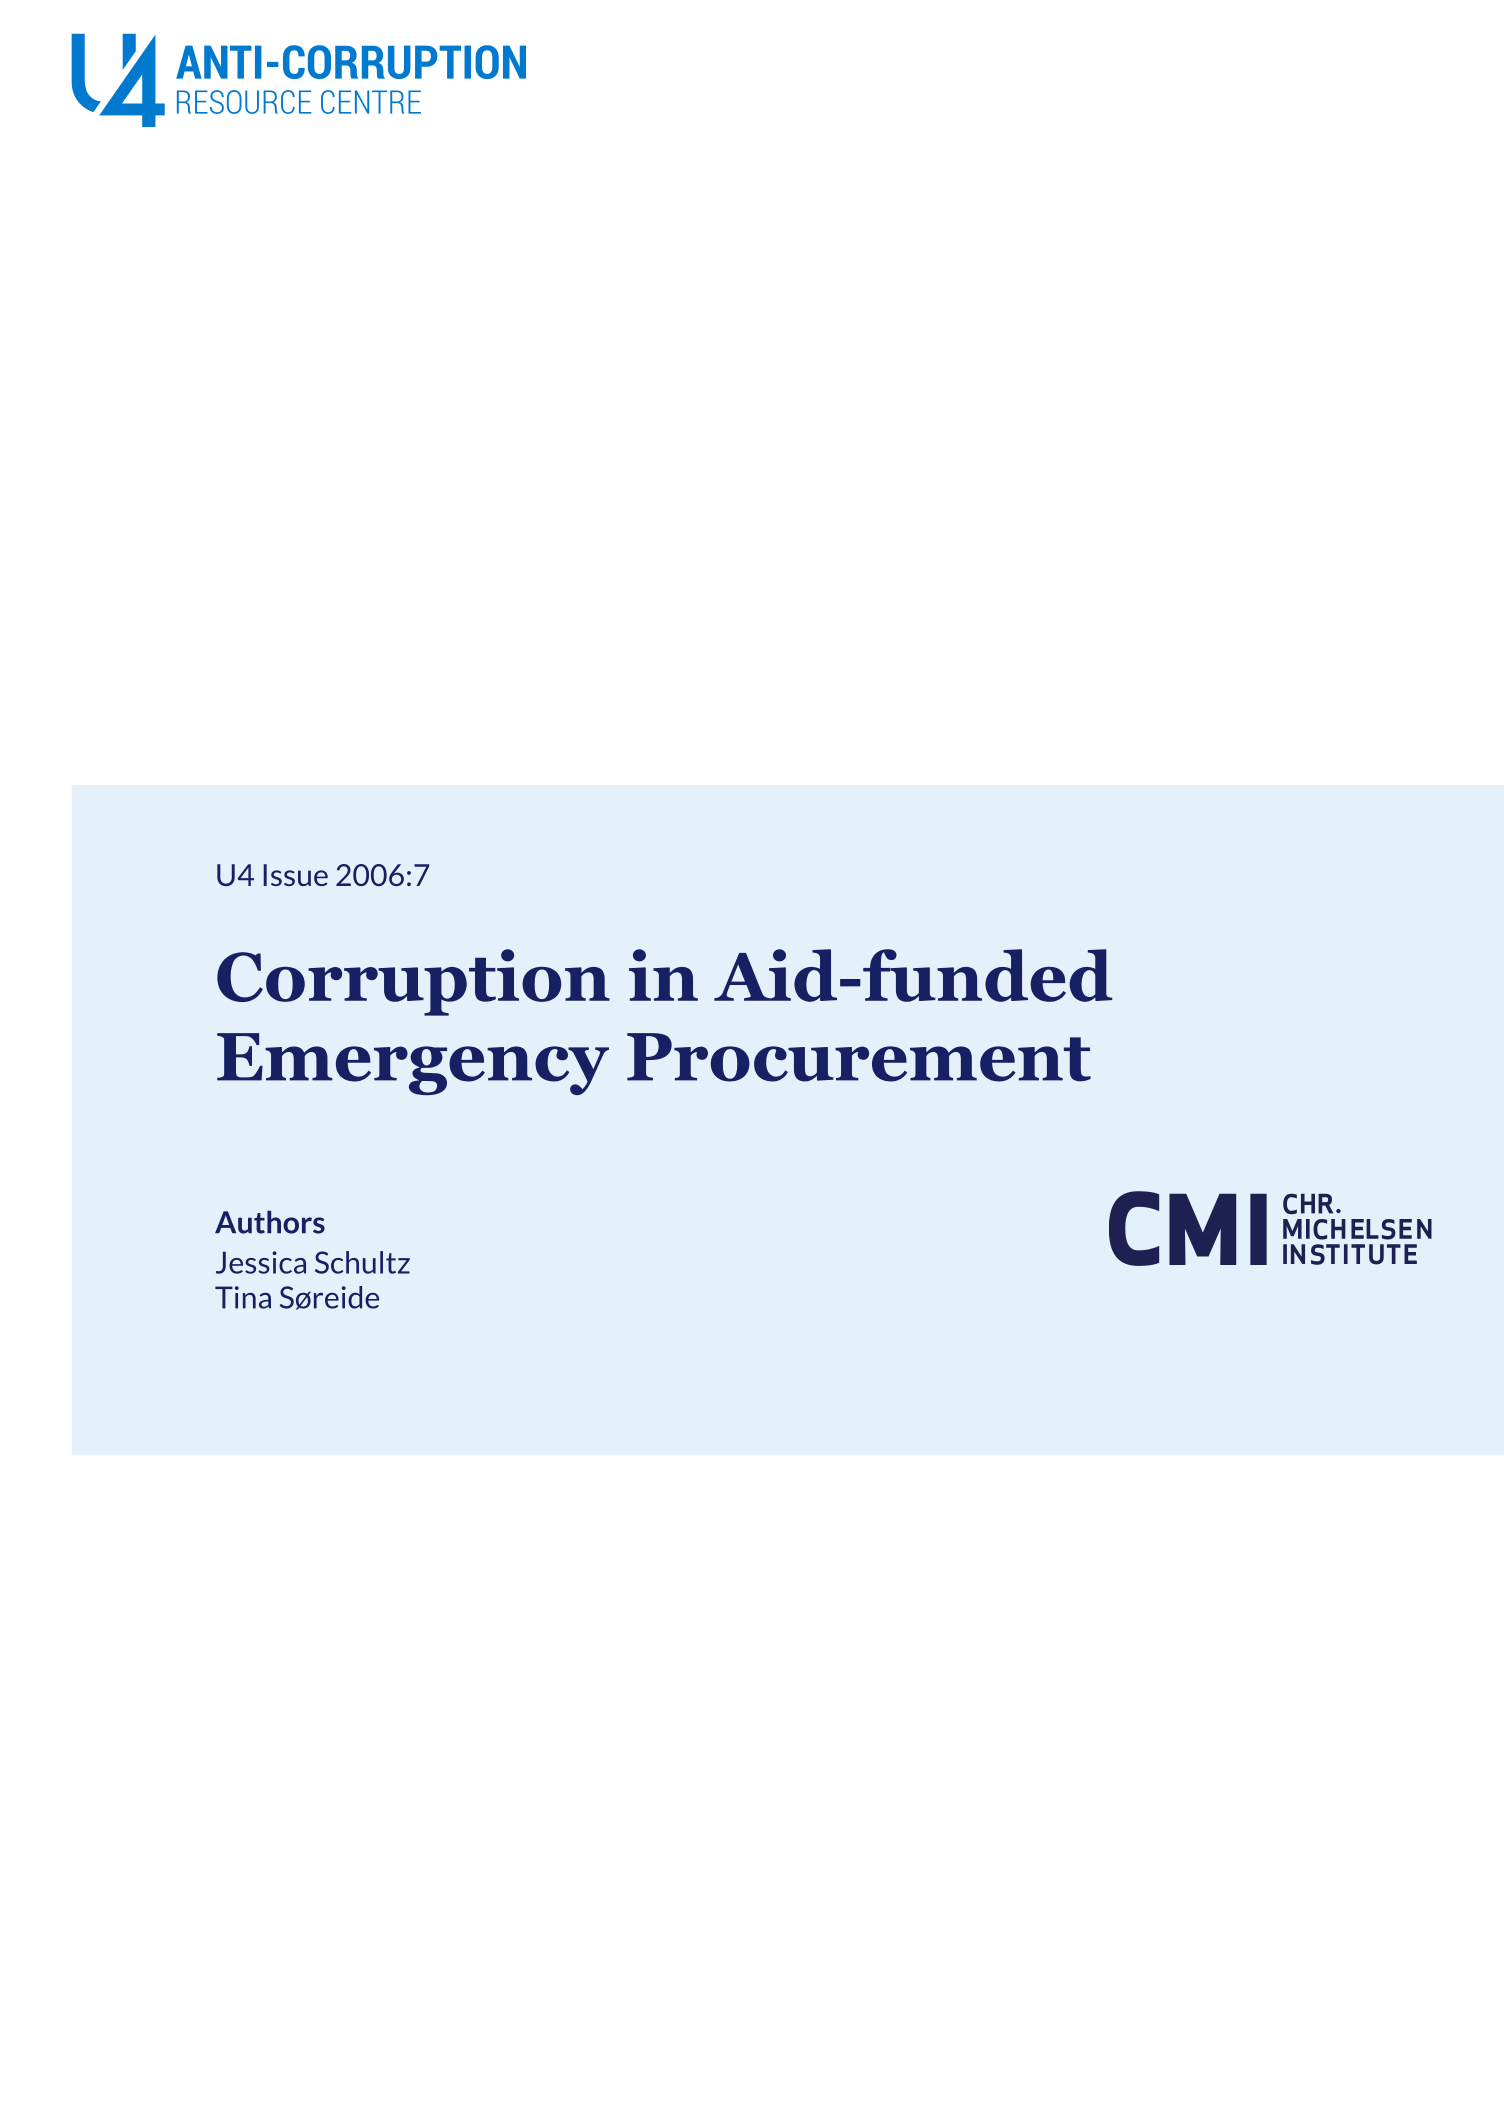 Corruption in Aid-funded Emergency Procurement